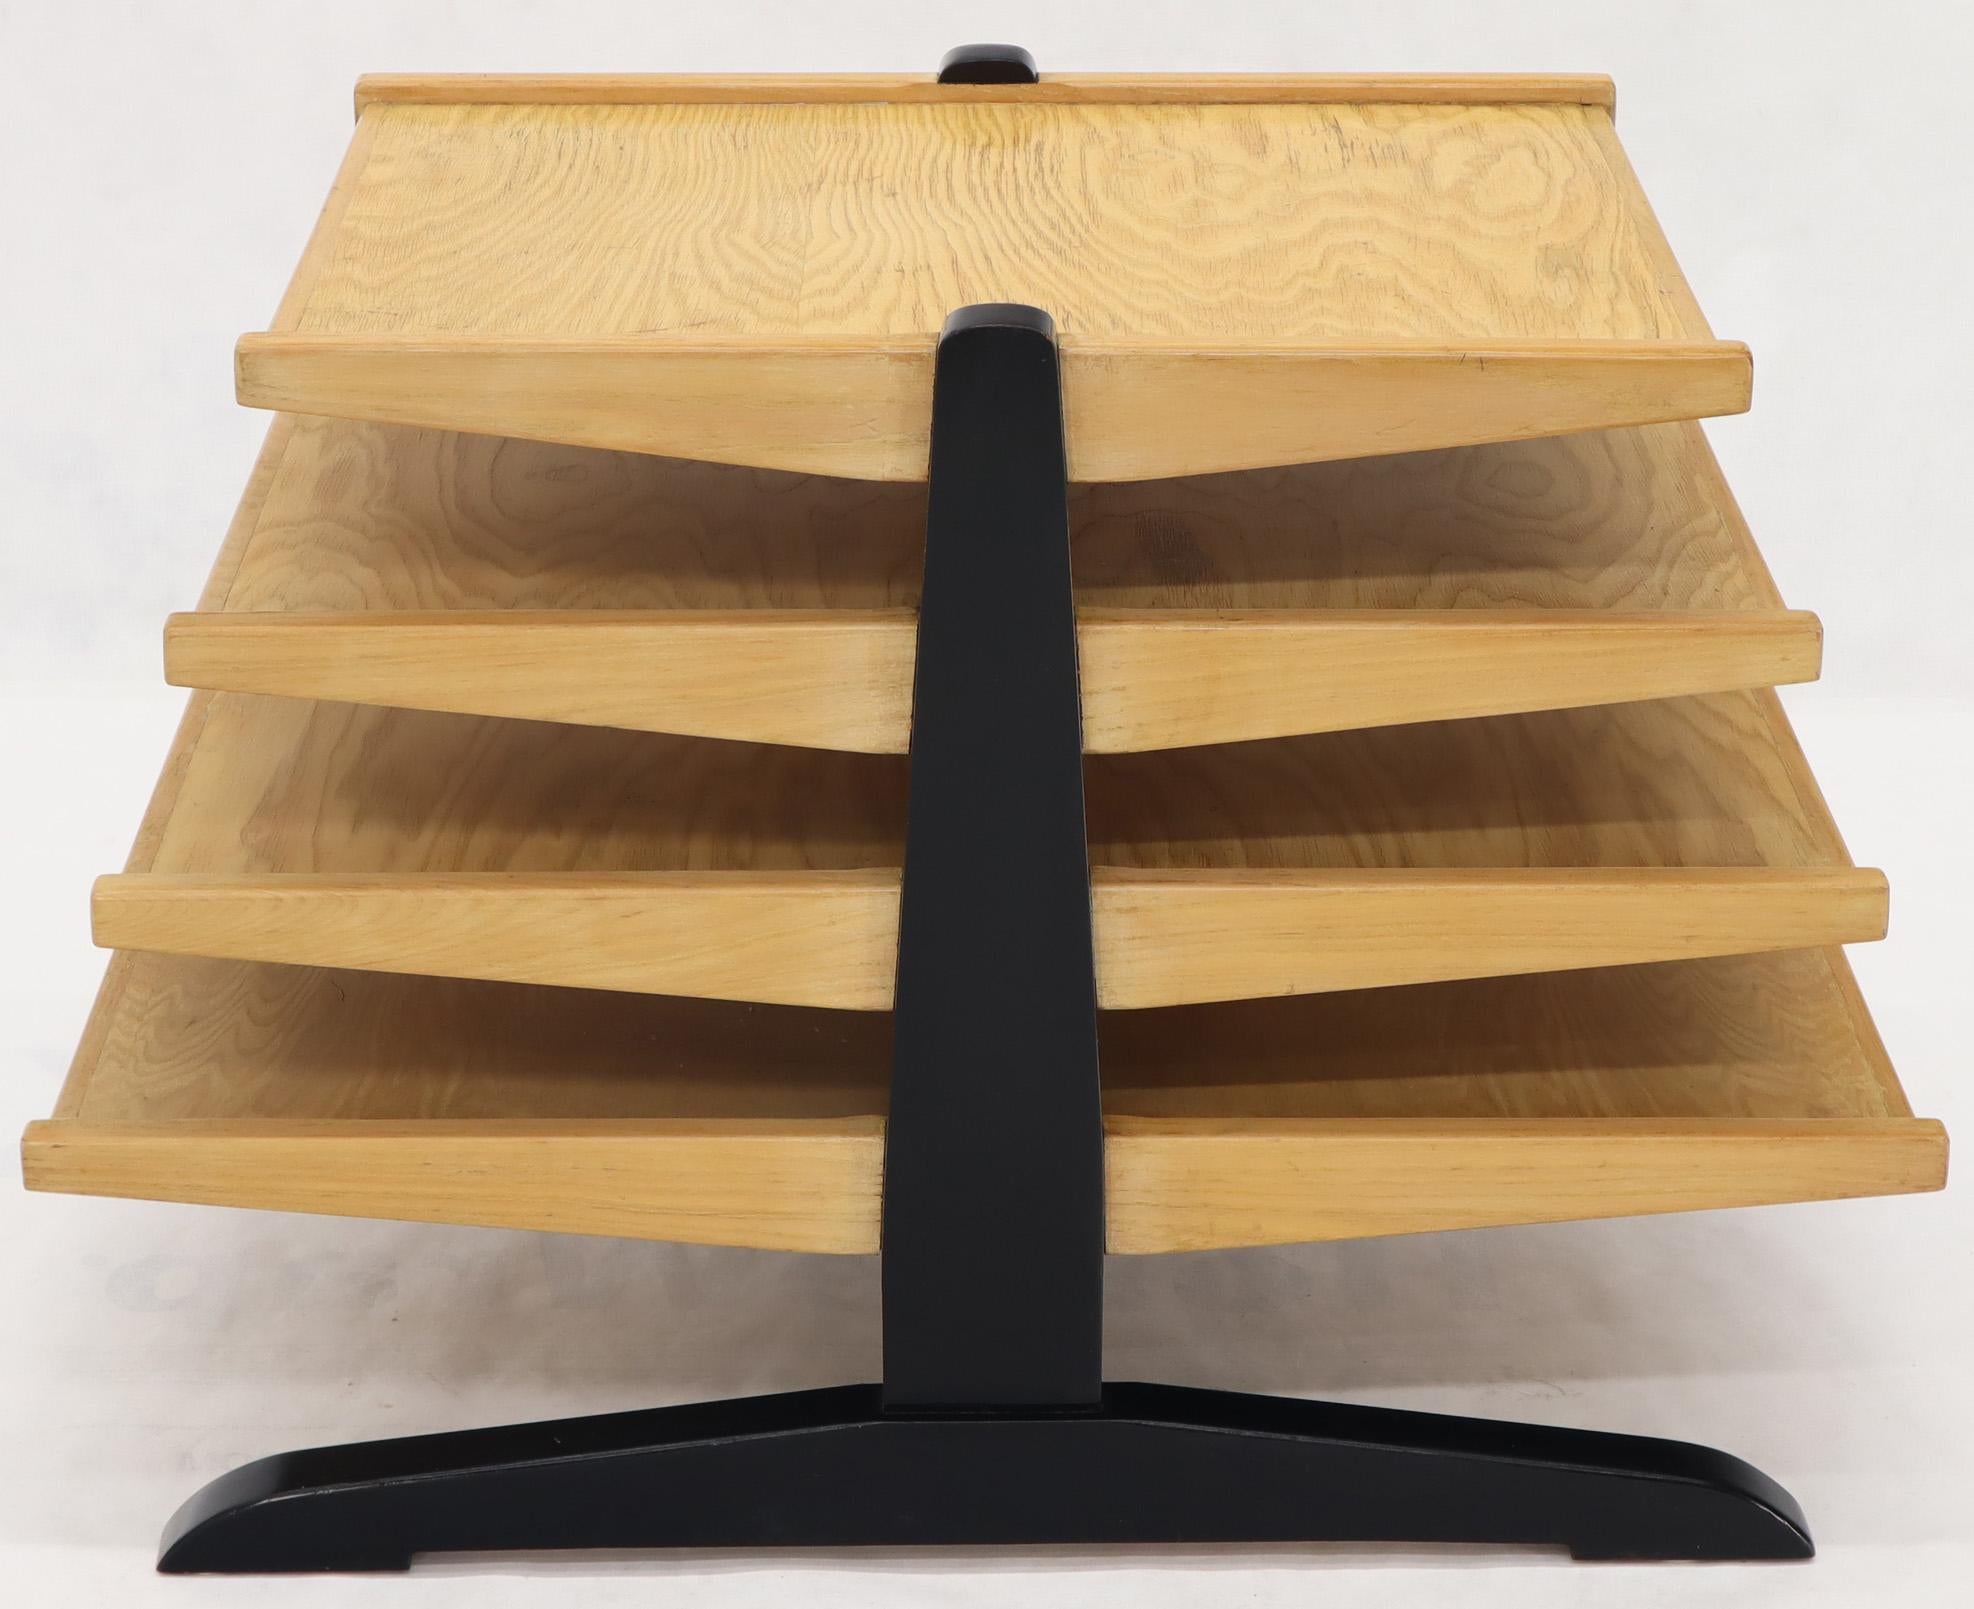 Free standing Mid-Century Modern 4 level wings large magazine rack stands shelf display. In style of Dunbar.